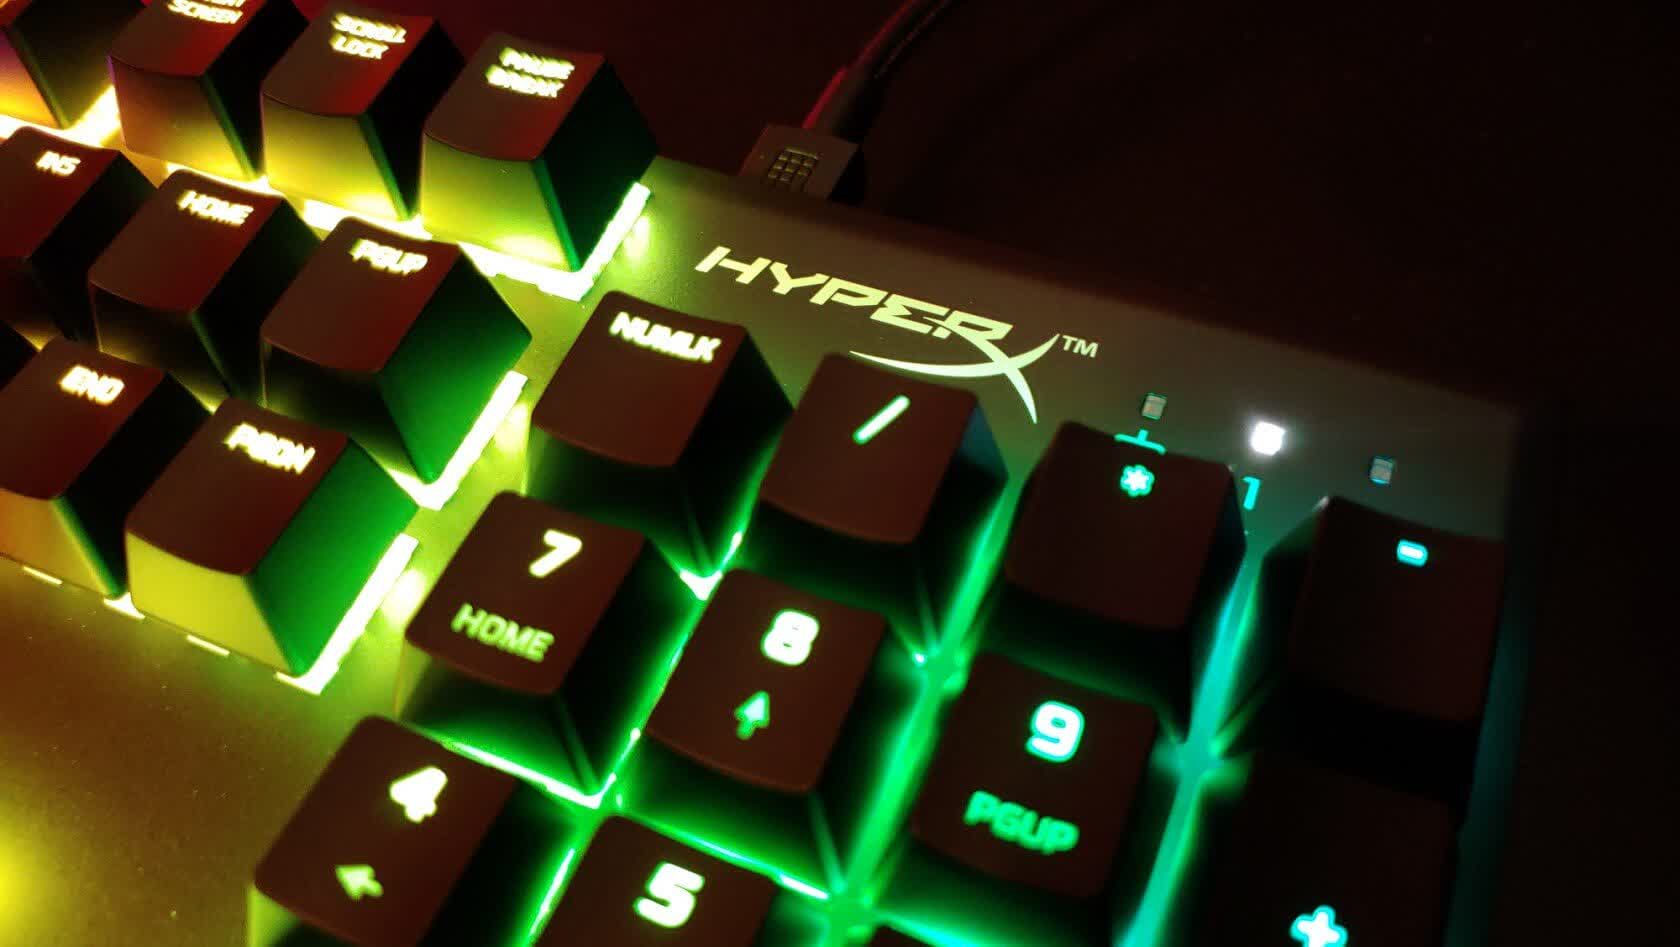 Kingston HyperX Alloy FPS RGB Reviews, Pros and Cons, Price Tracking | TechSpot